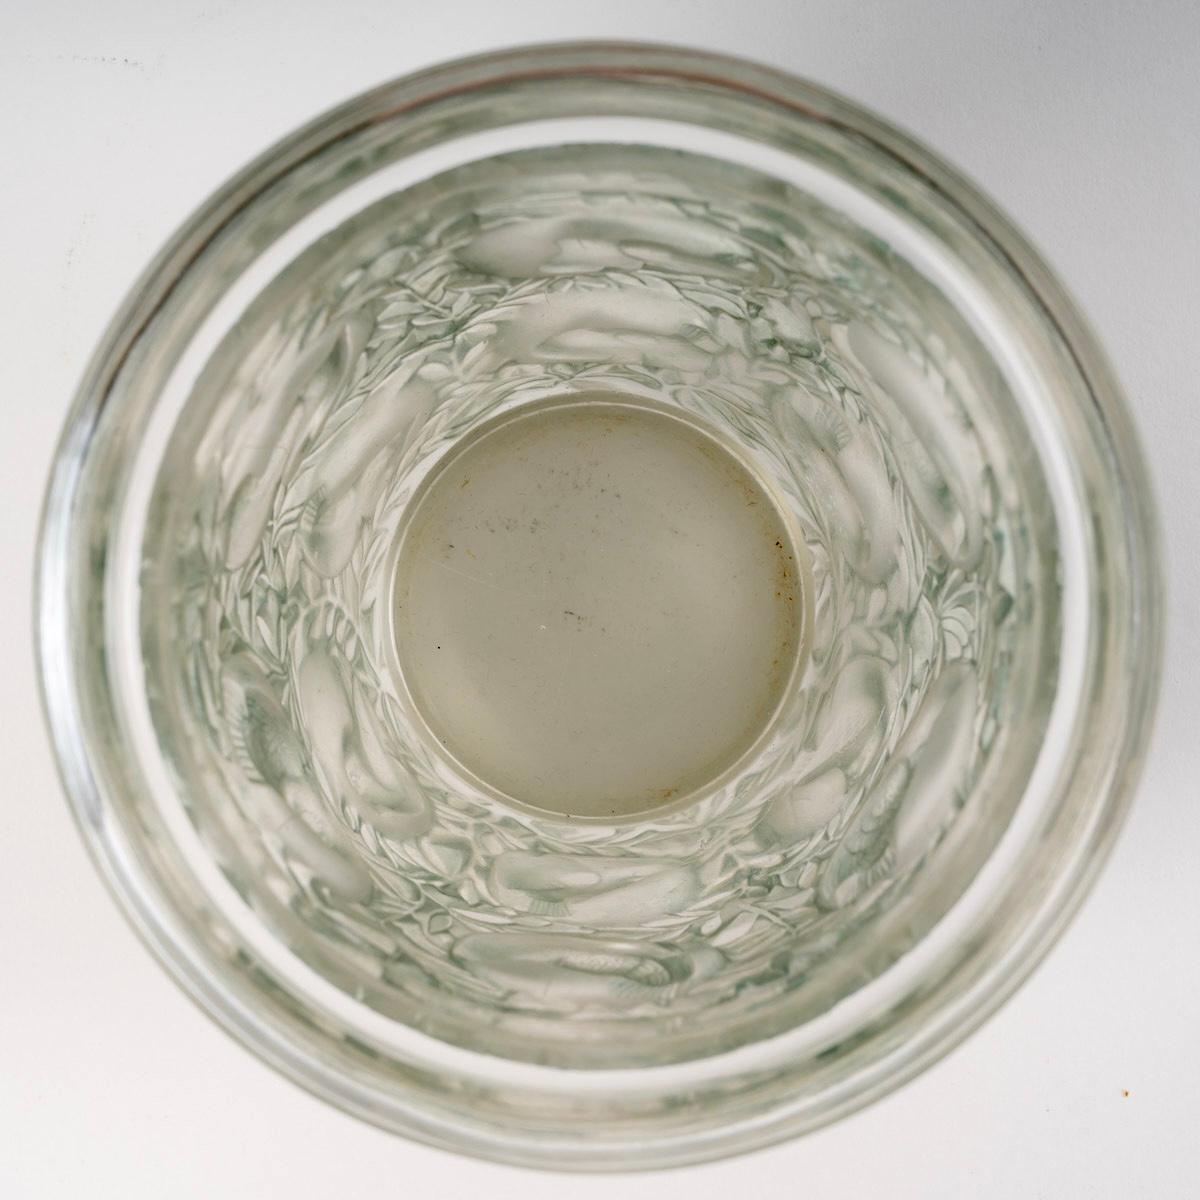 French 1939 René Lalique Bagatelle Vase in Frosted Glass with Green Patina